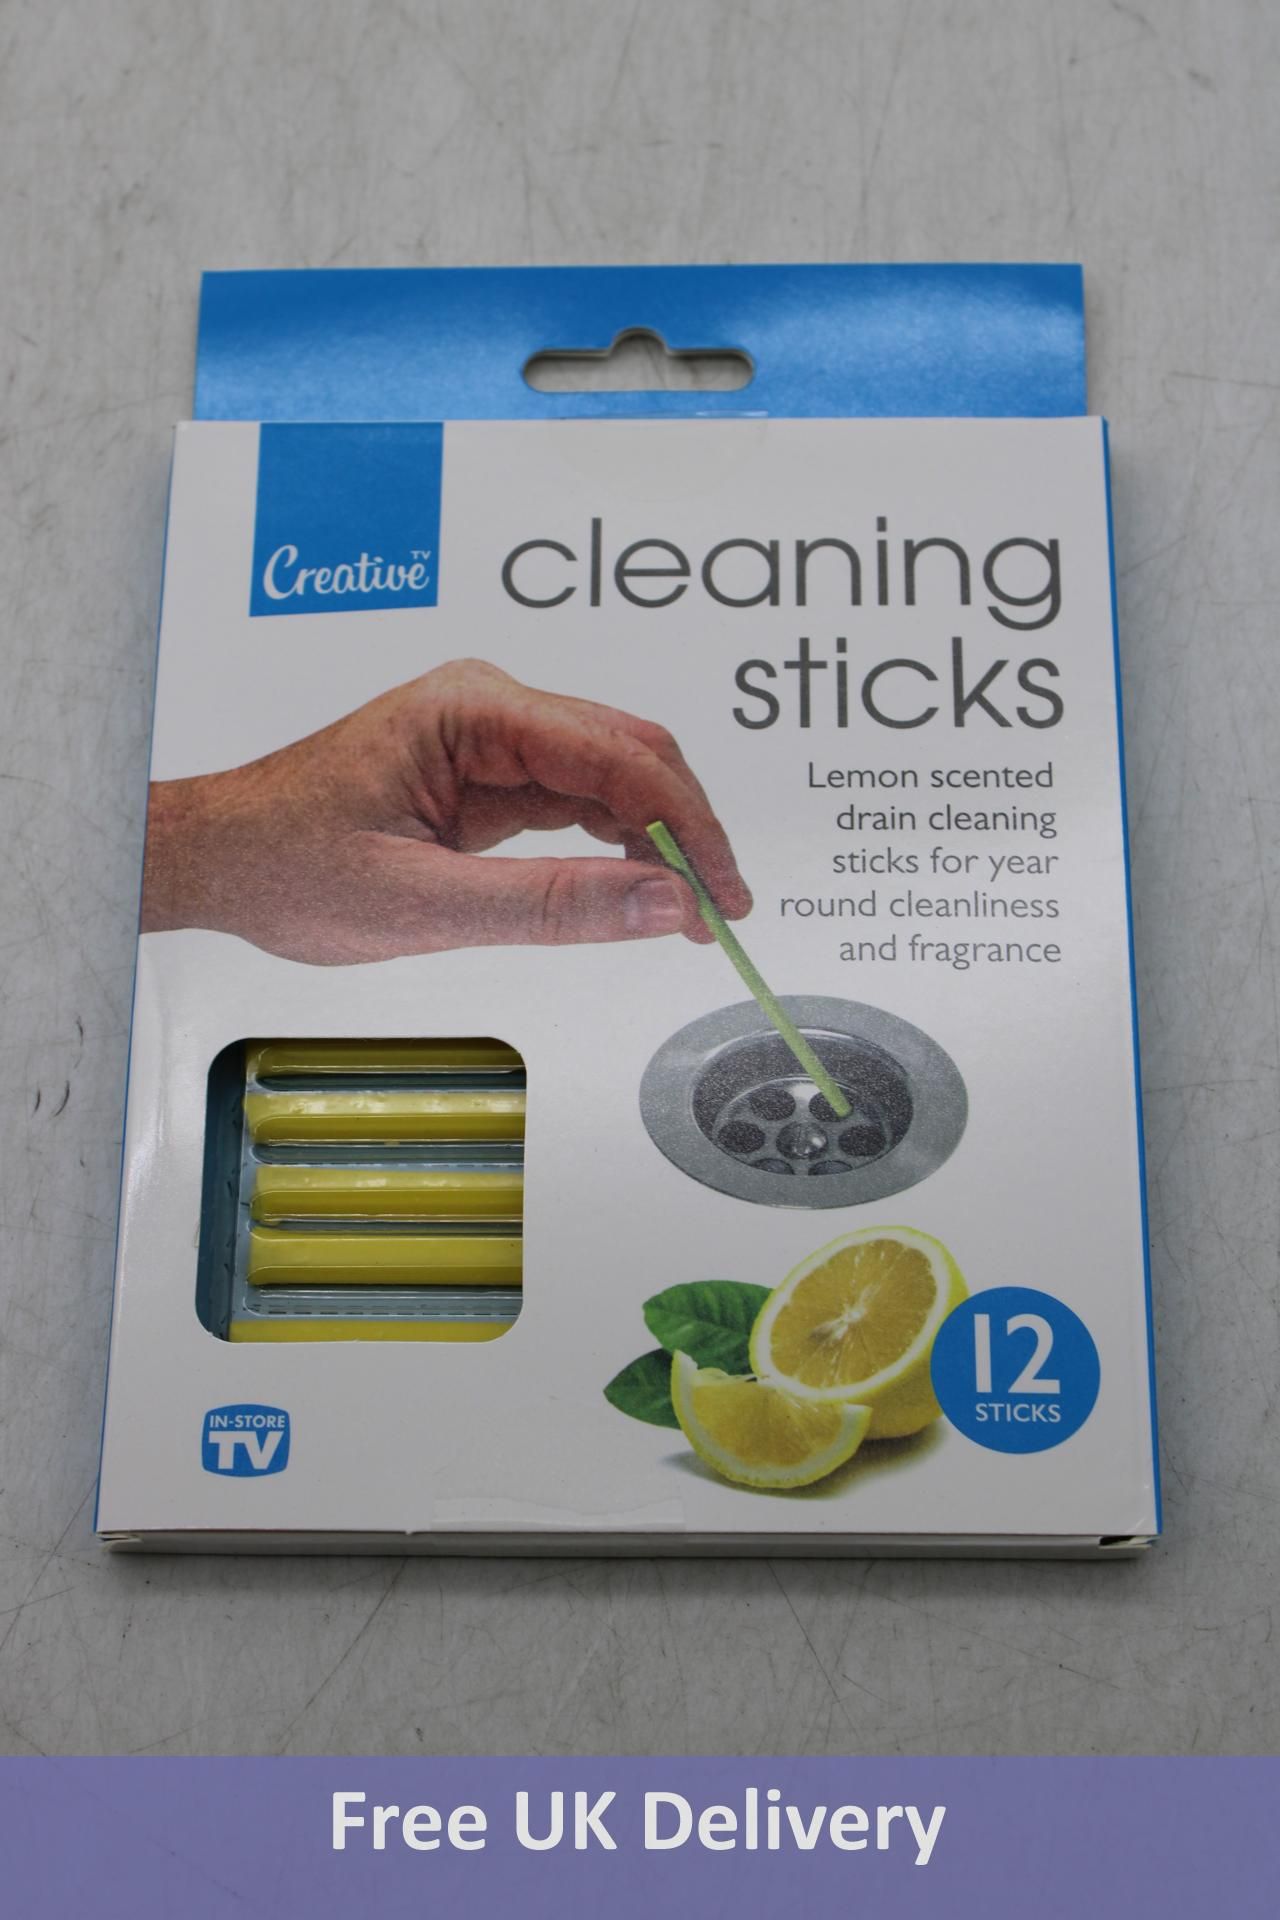 Twenty-four packs of Creative Cleaning Sticks, Pack of 12